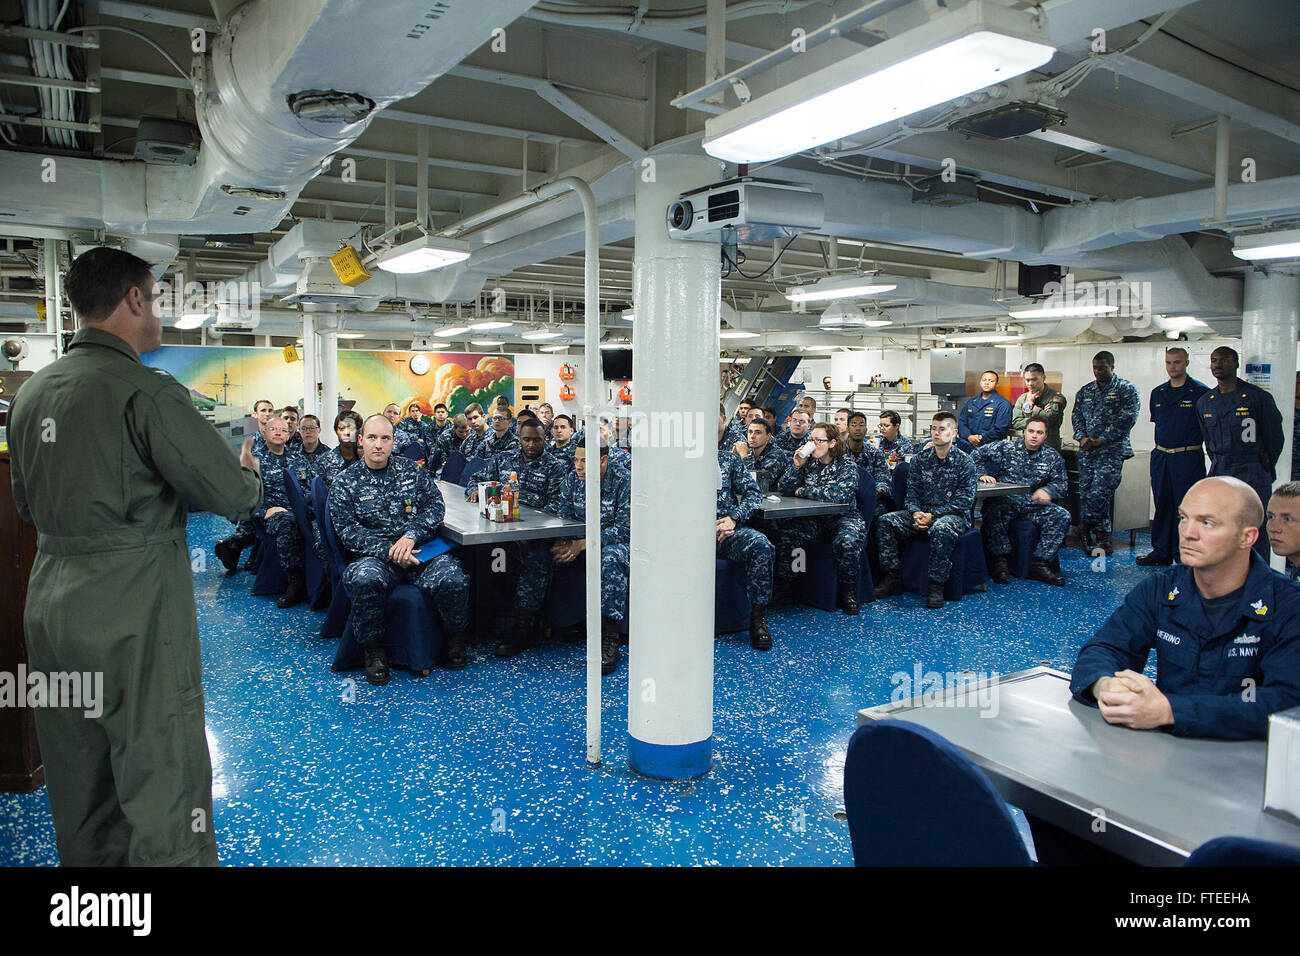 140530-N-EZ054-026  ATLANTIC OCEAN (May 30, 2014) Capt. Craig A. Clapperton, commanding officer of the USS Mount Whitney (LCC20) speaks to sailors assigned to the Mount Whitney during an All Hands Call aboard the Mount Whitney. Mount Whitney, homeported in Gaeta, Italy, is the U.S. 6th Fleet flagship and operates with a combined crew of U.S. sailors and Military Sealift Command (MSC) civil service mariners. (U.S. Navy photo by Mass Communication Specialist 3rd Class Luis R. Chavez Jr/Released) Stock Photo